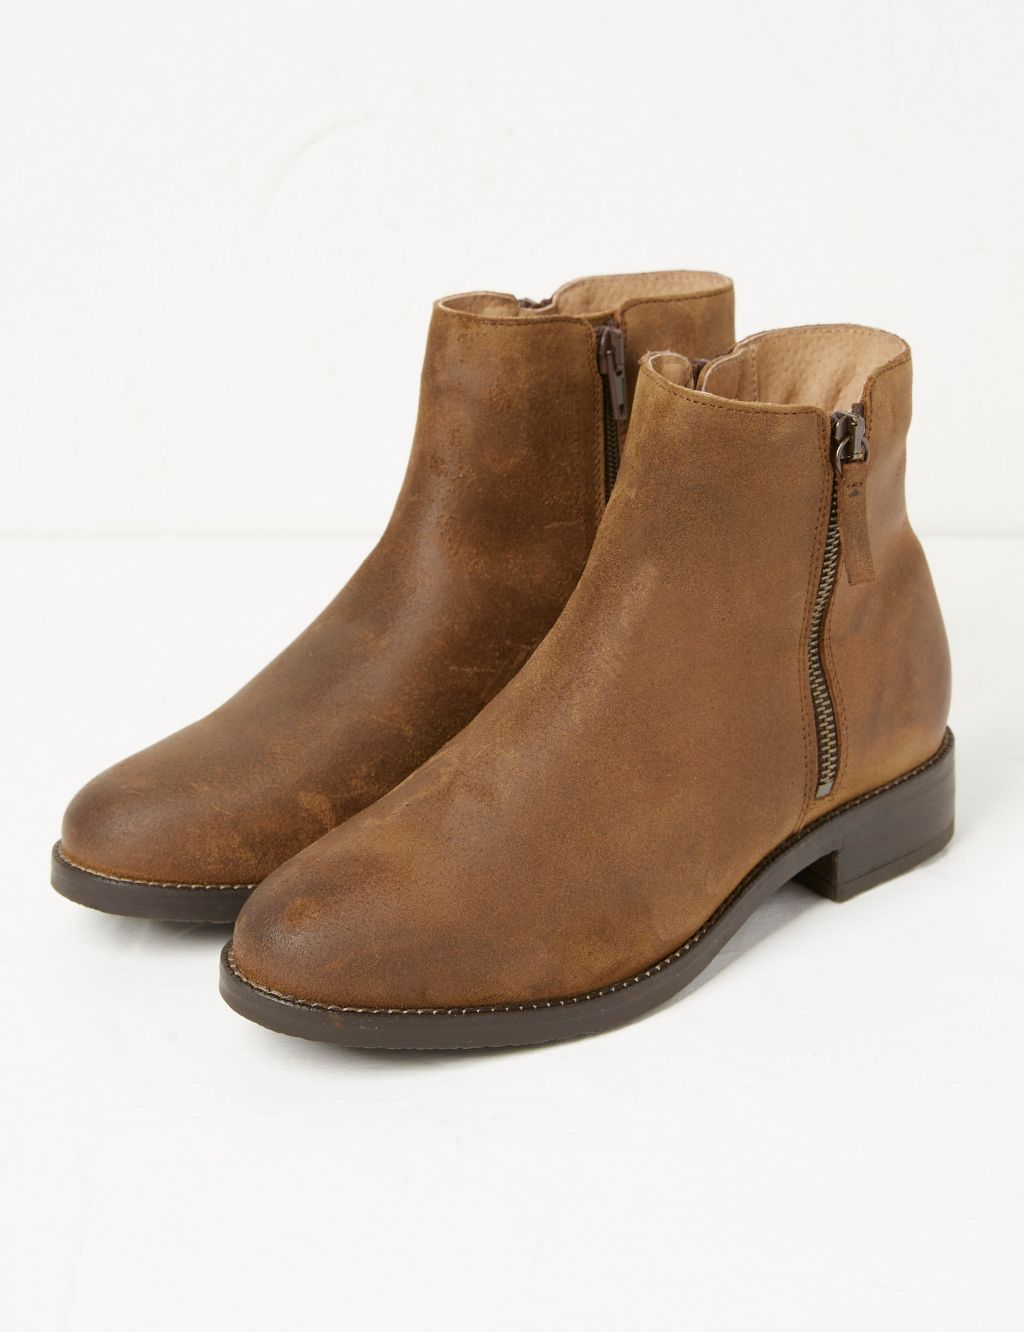 Leather Flat Ankle Boots image 2